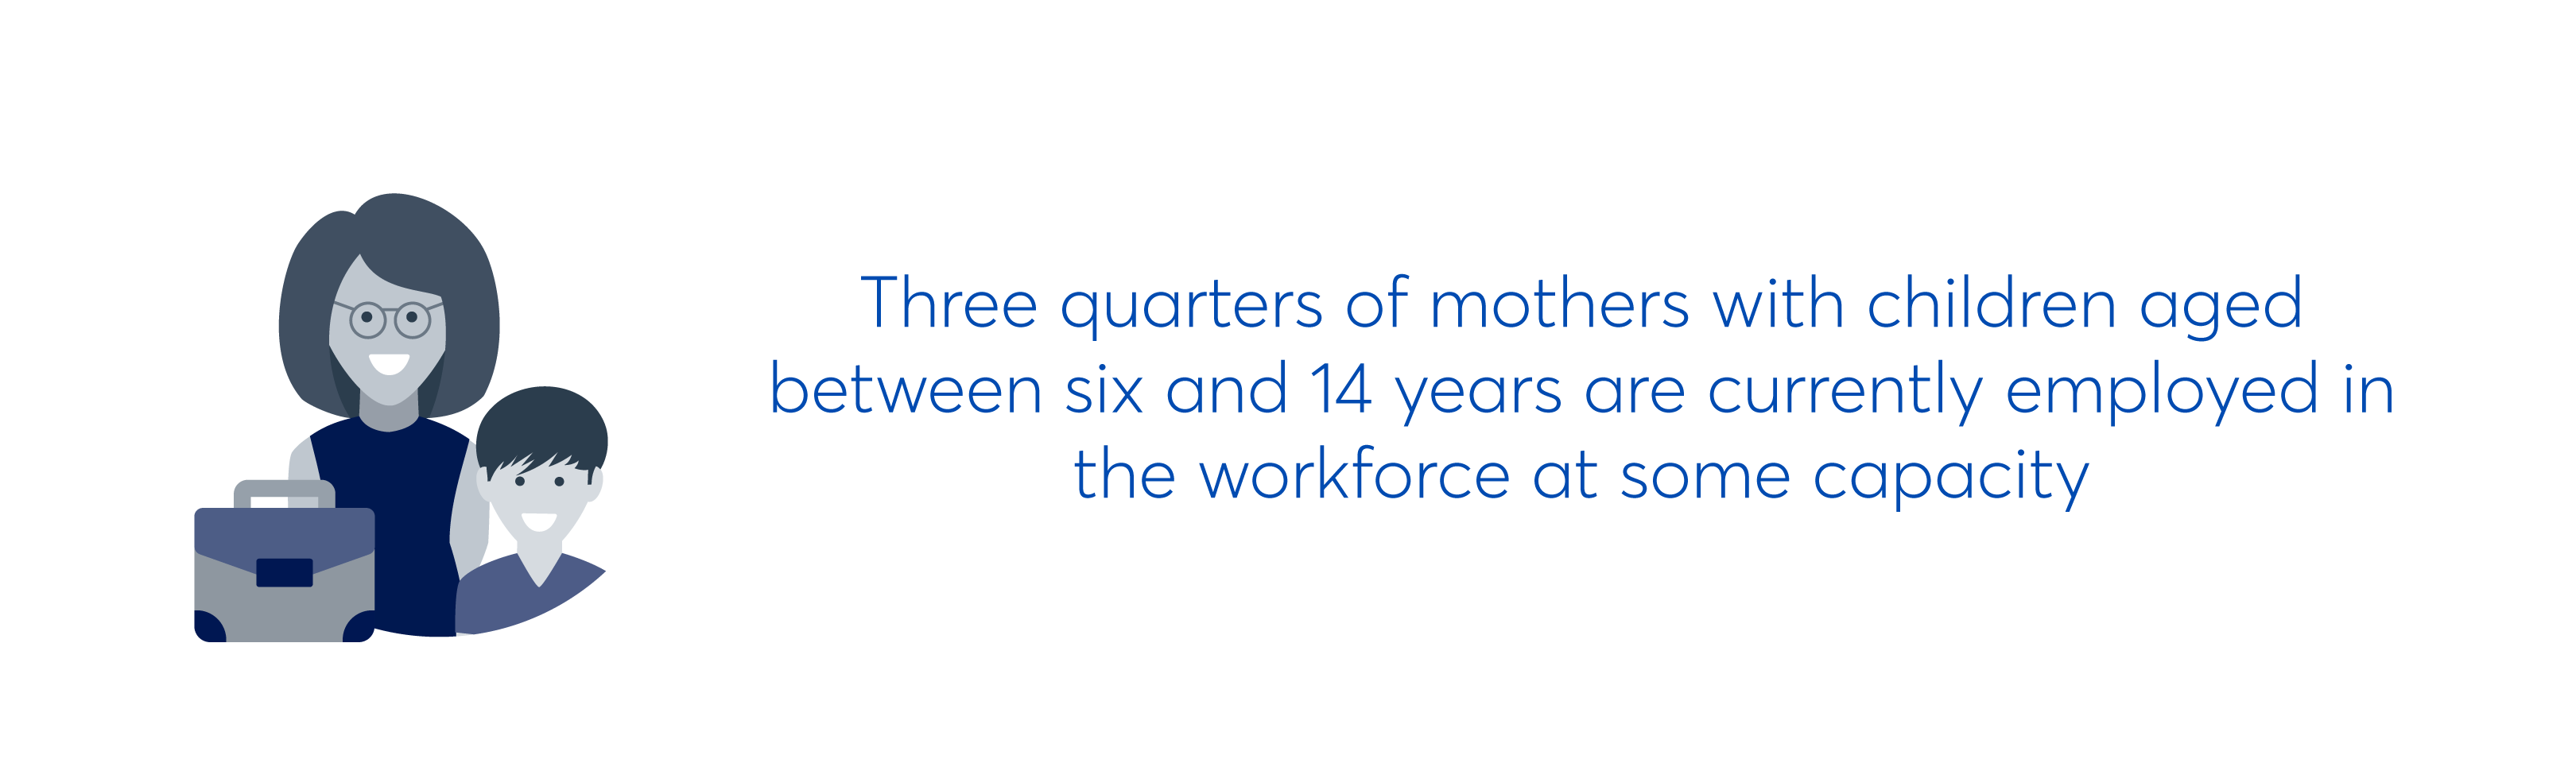 3/4 mums with young teens/kids are employed in the workforce